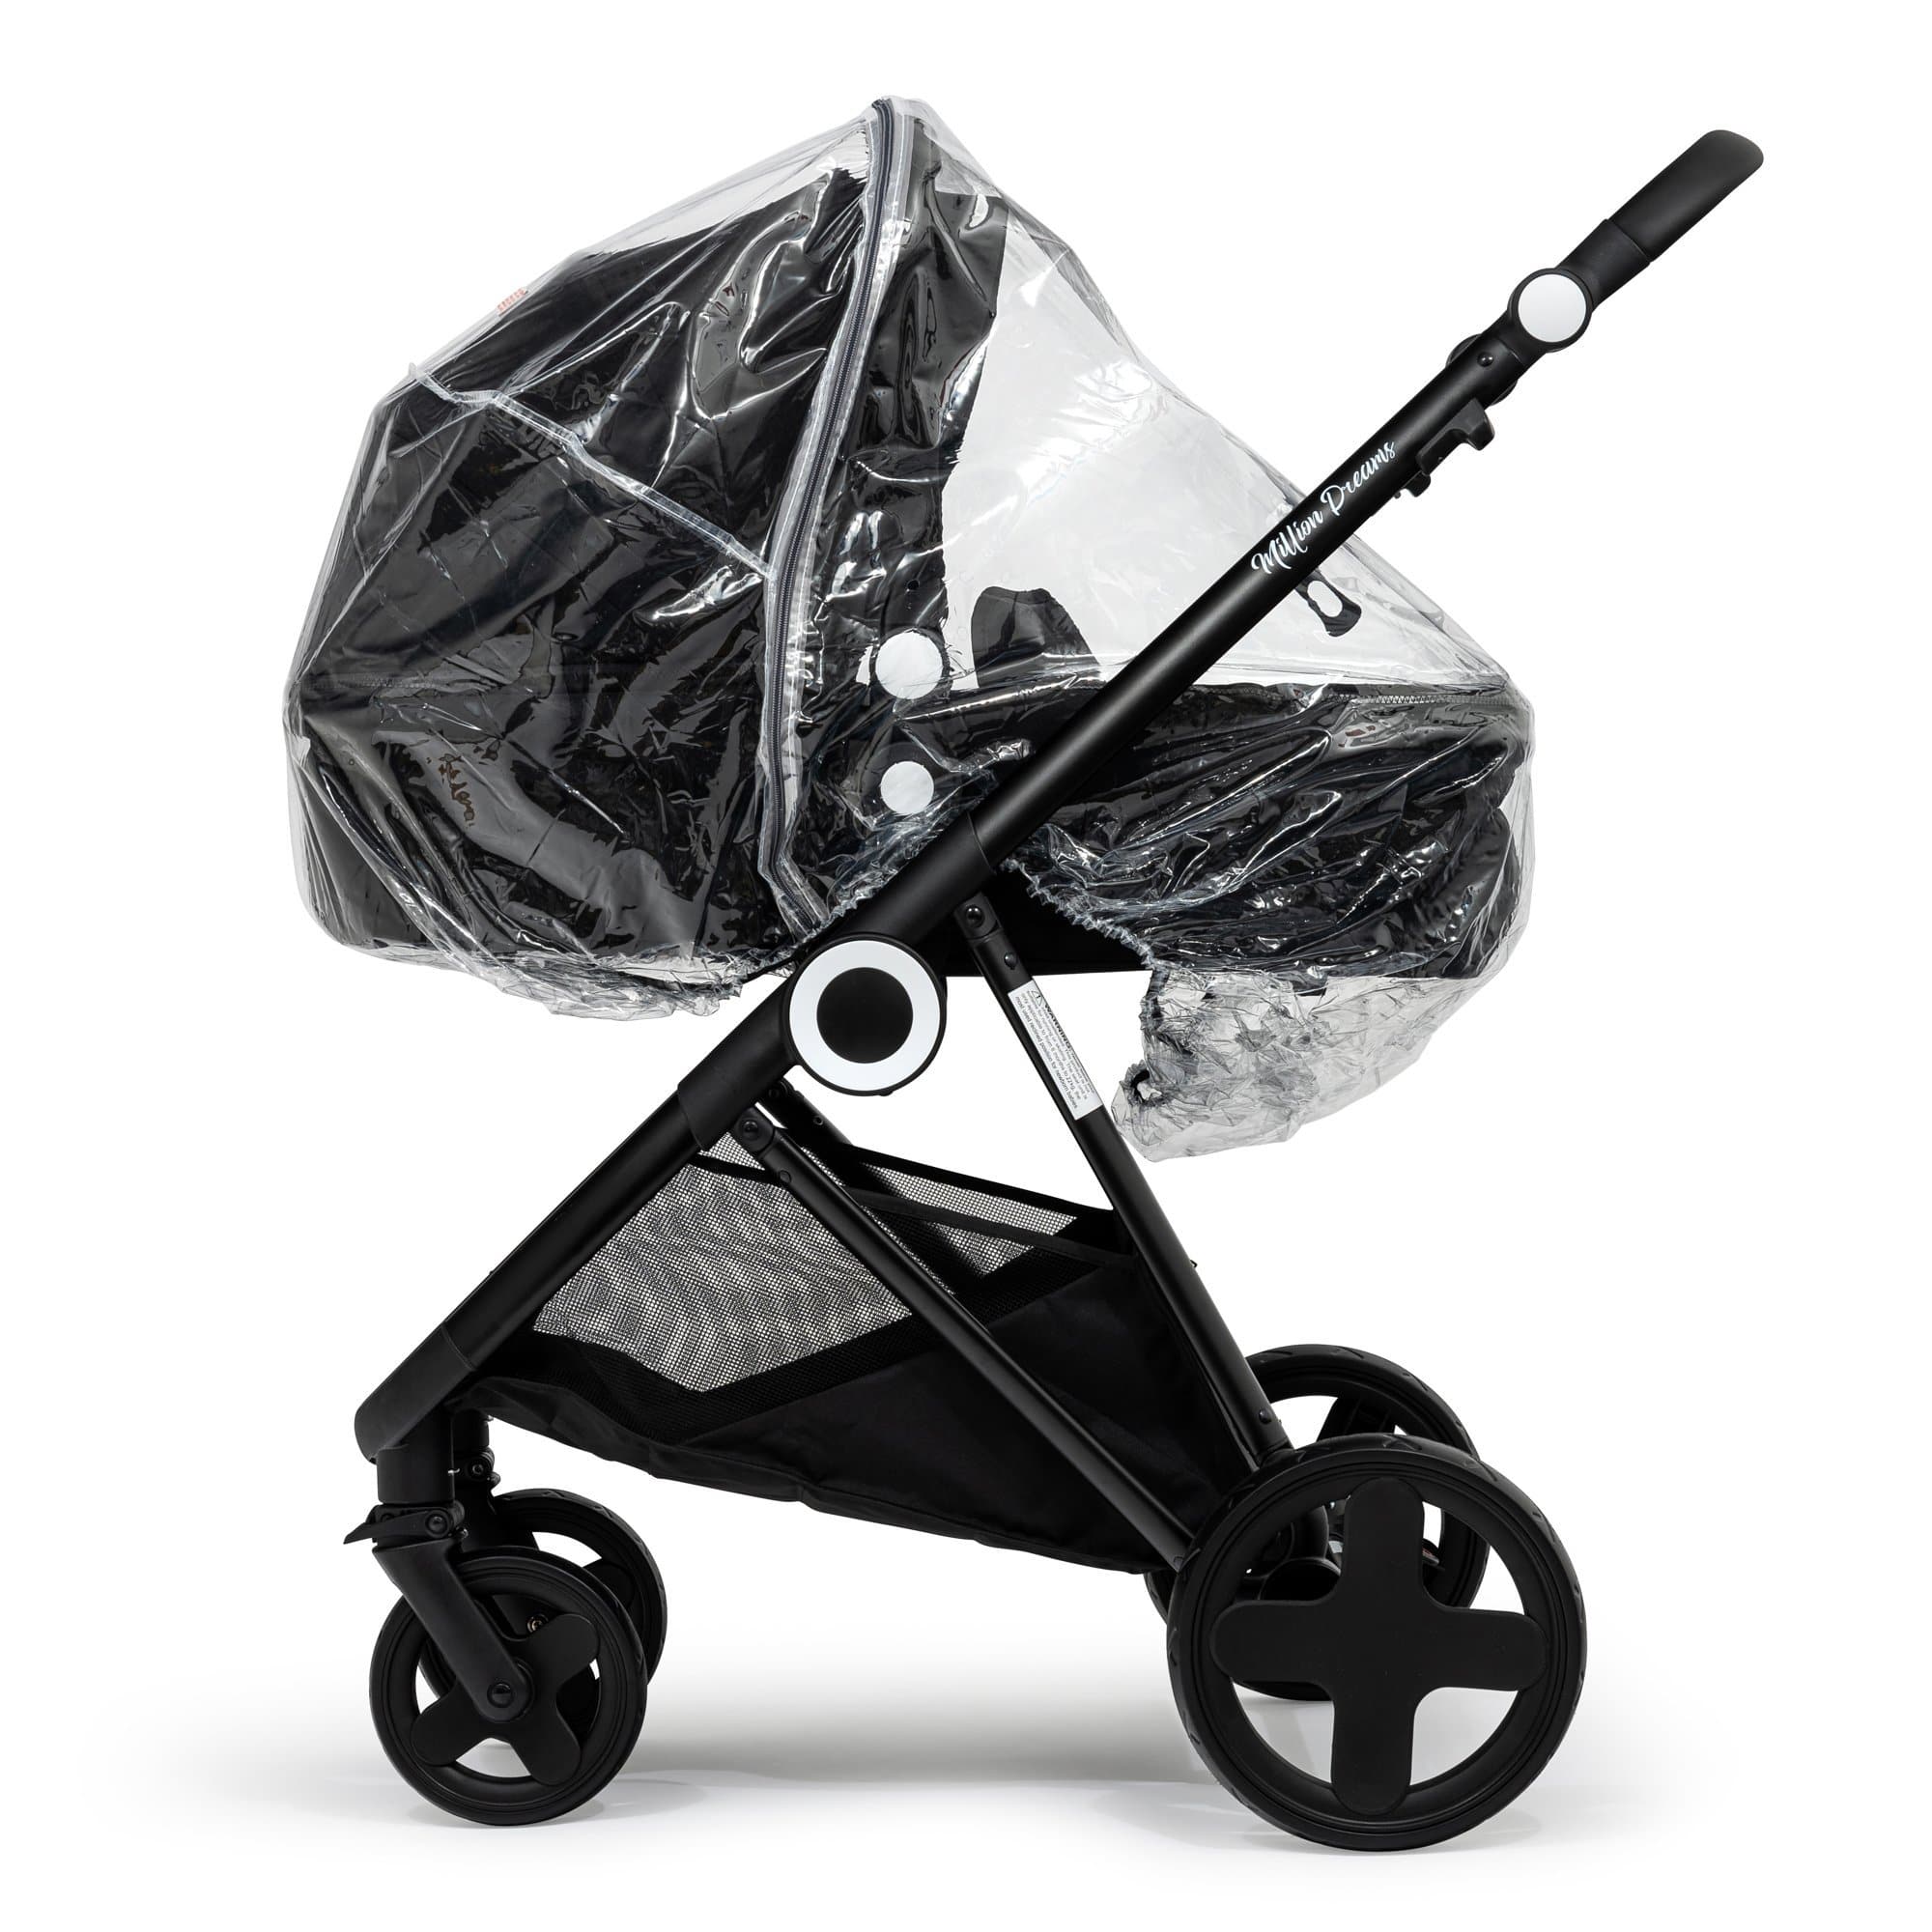 2 in 1 Rain Cover Compatible with Urban Detour - Fits All Models - For Your Little One